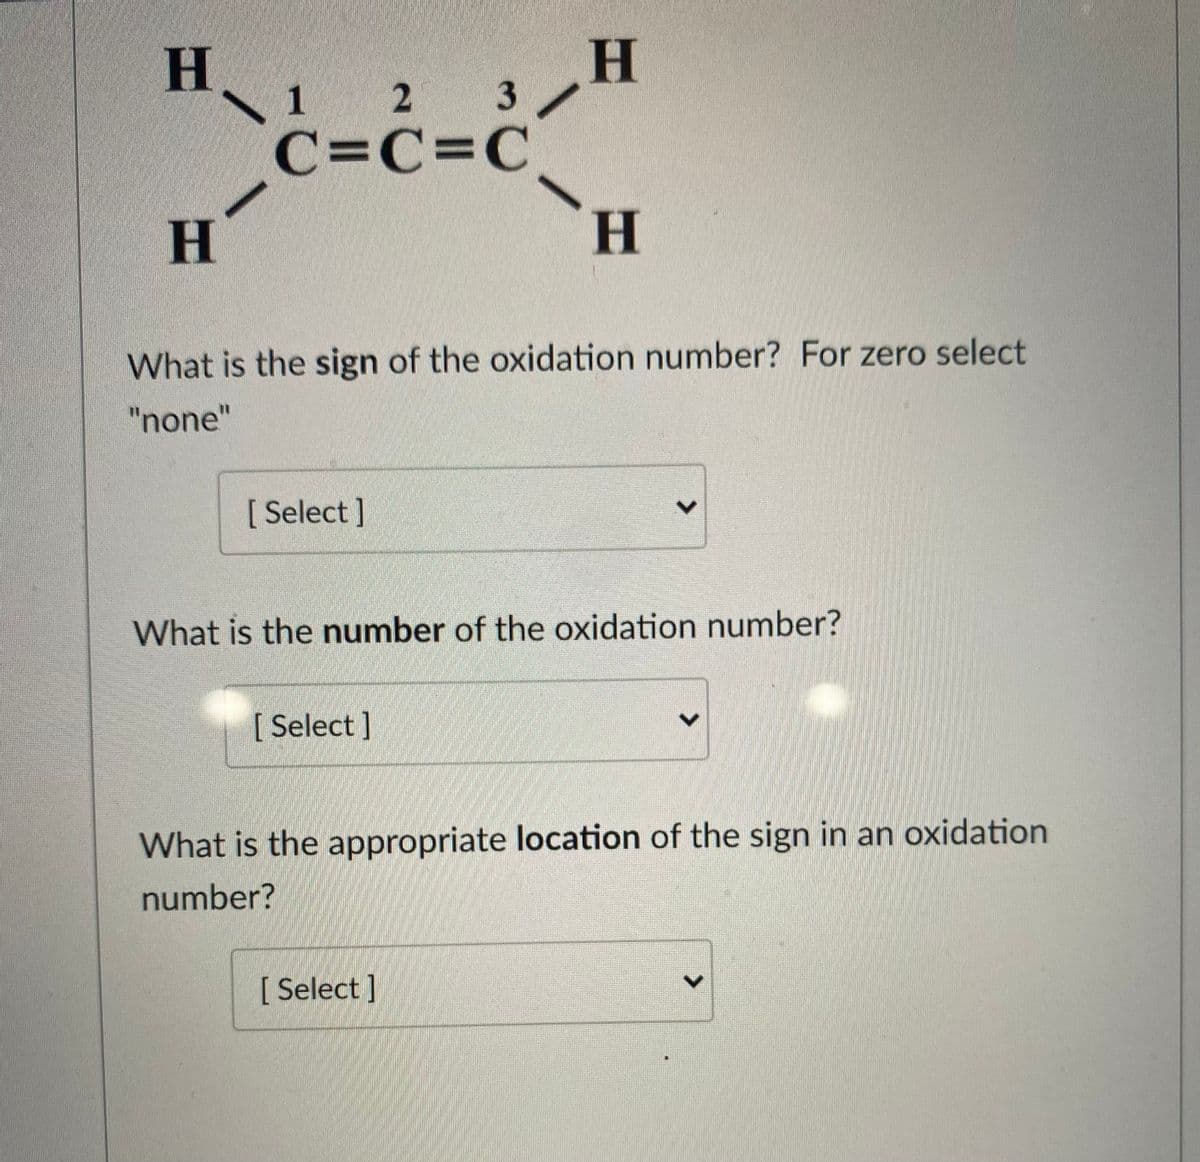 H 2 3/
\ 1
C=C=C°
H.
What is the sign of the oxidation number? For zero select
"none"
[ Select ]
What is the number of the oxidation number?
[ Select]
What is the appropriate location of the sign in an oxidation
number?
[ Select ]
<>
